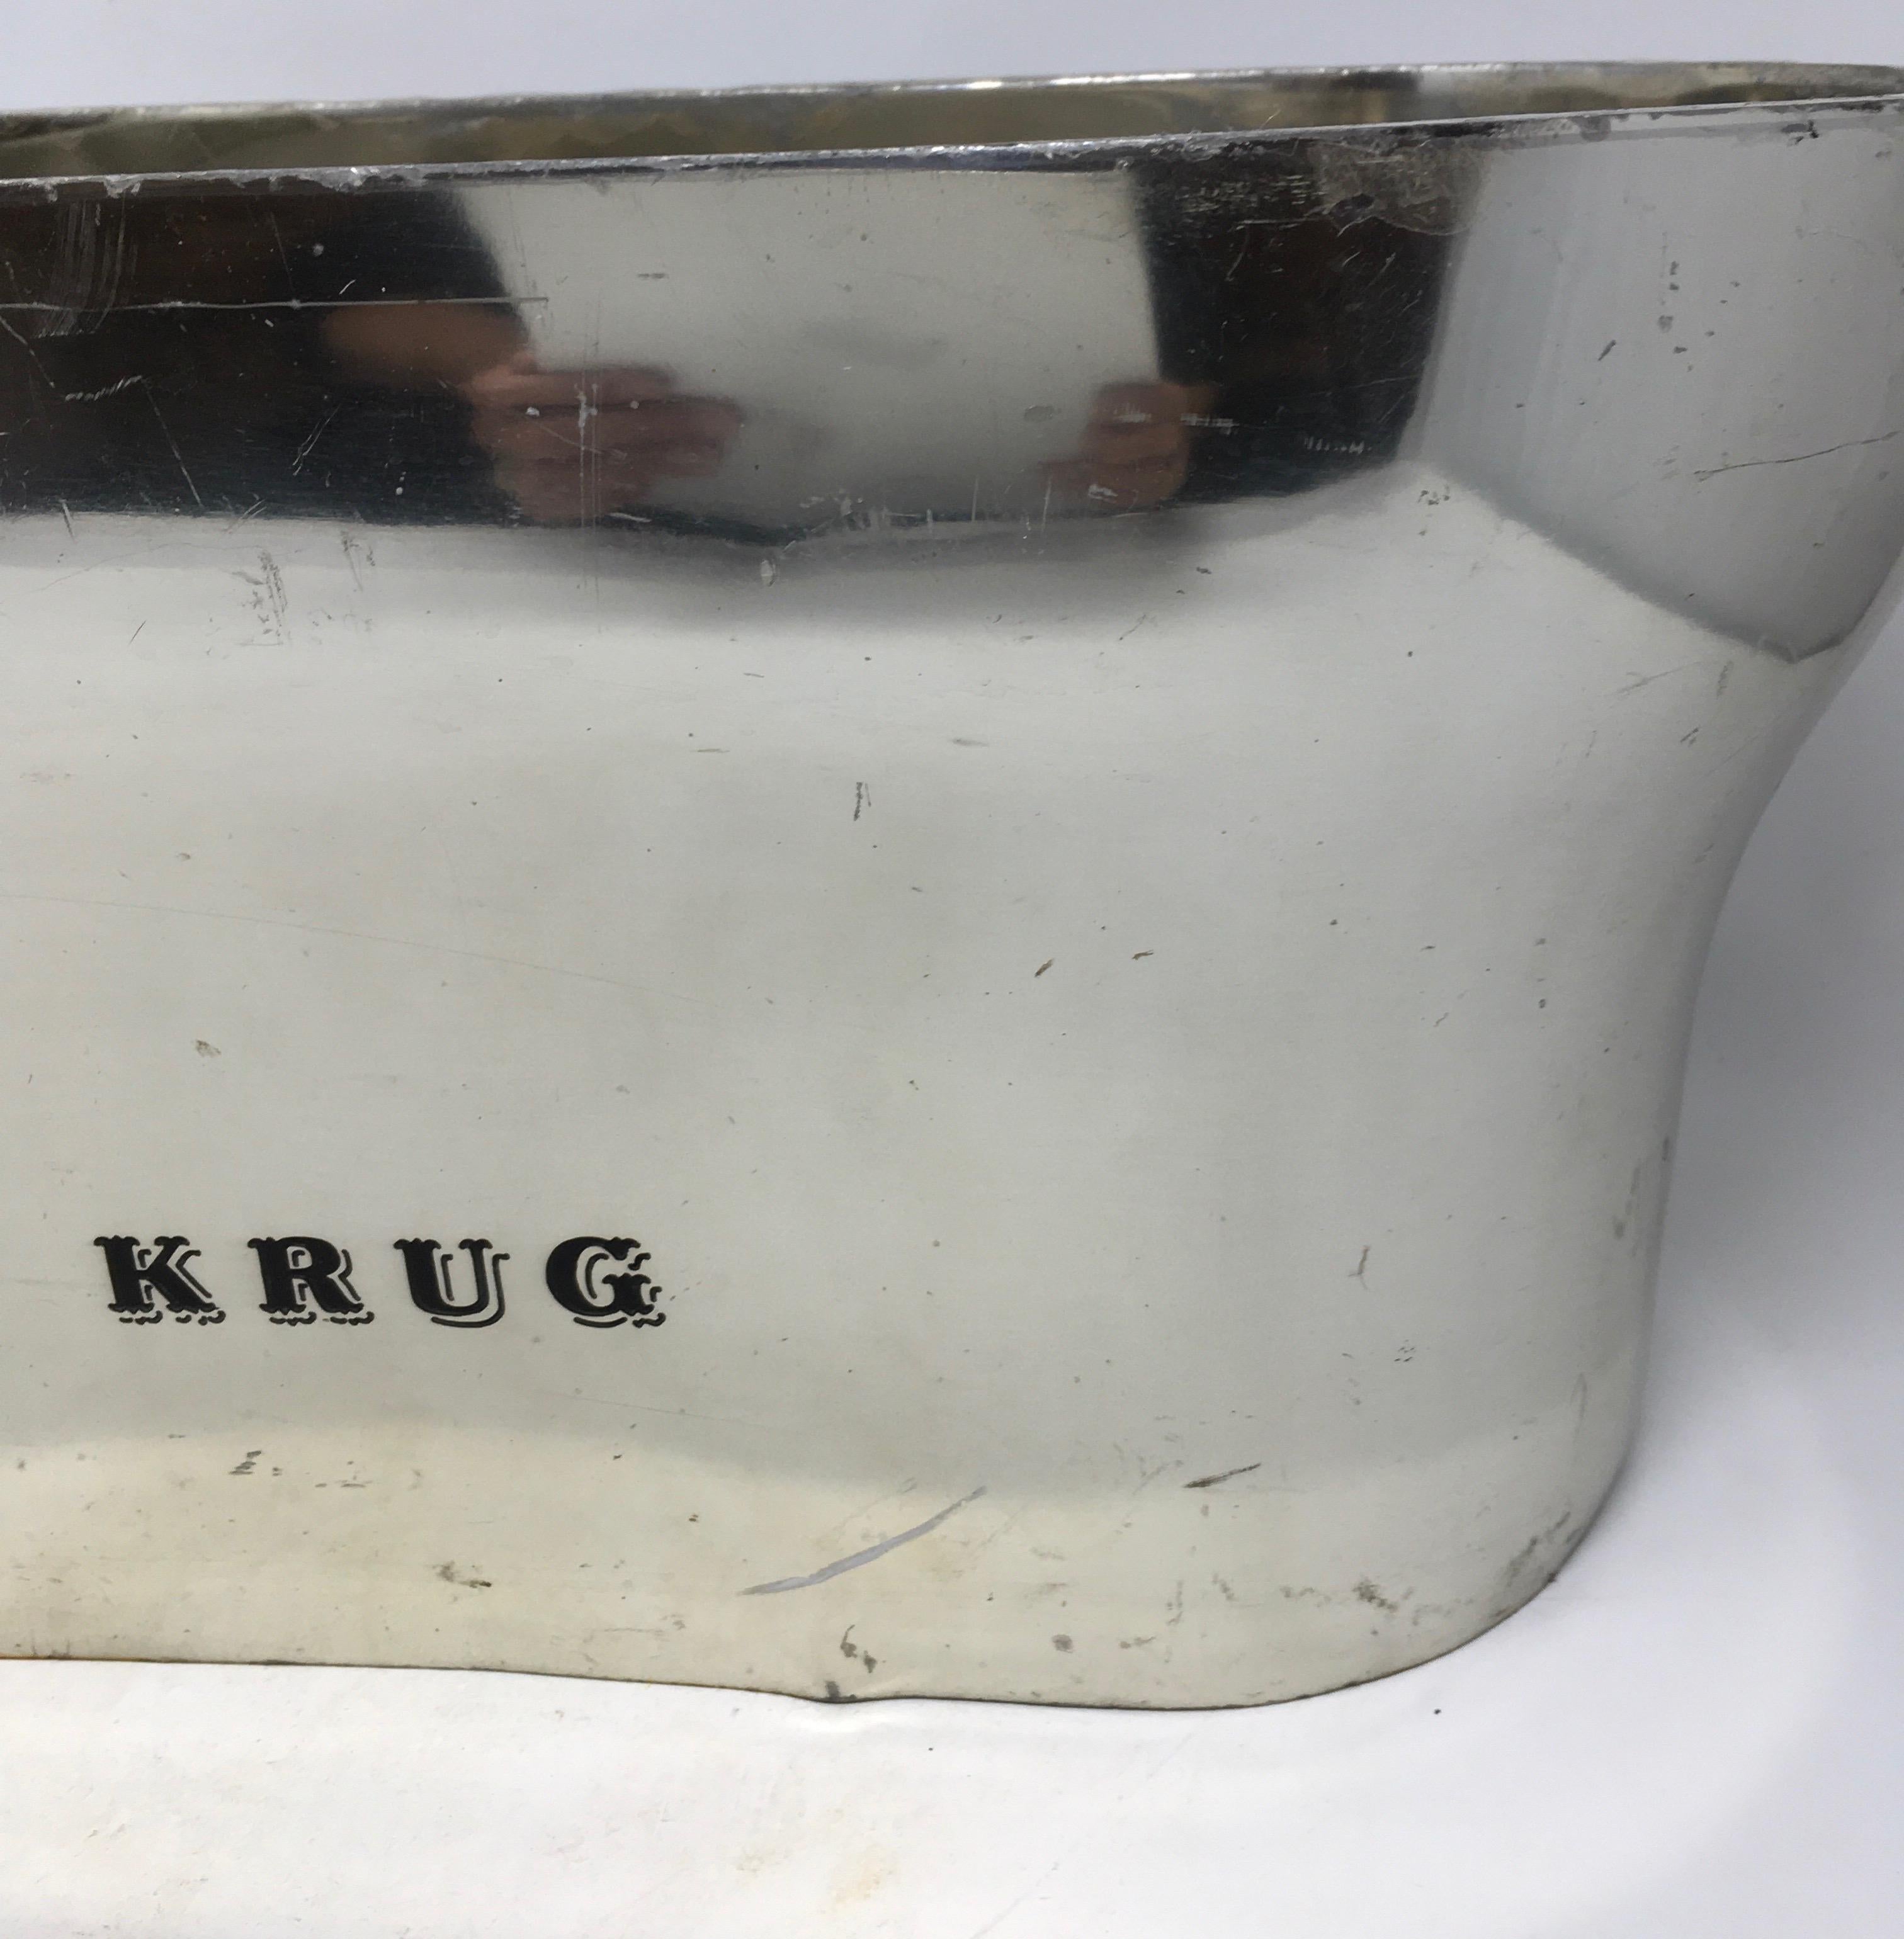 A fabulous double or magnum cooler from the house of Krug to hold and chill your champagne or other wines. A lovely piece to use and display in your bar.
This piece weighs 11 lbs.